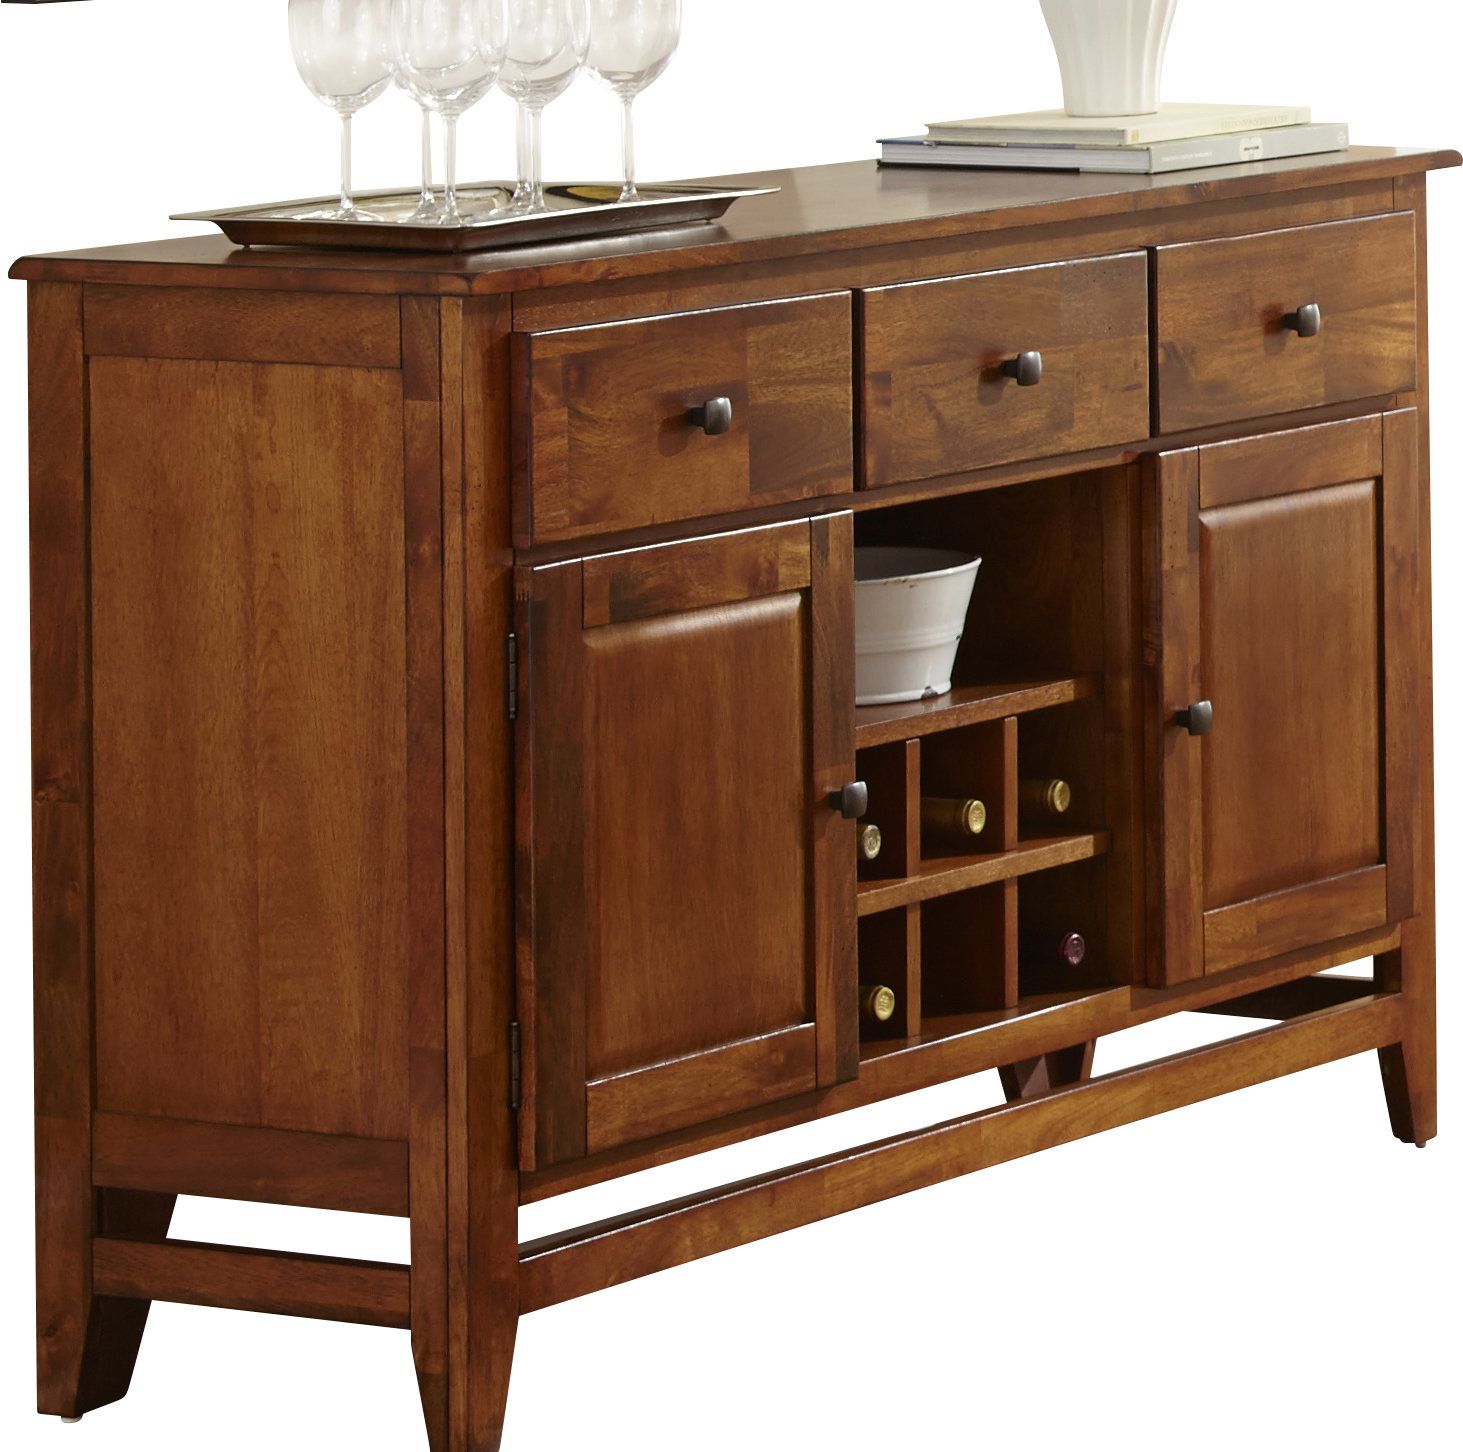 Chiricahua Sideboard Throughout Latest Lanesboro Sideboards (View 9 of 20)